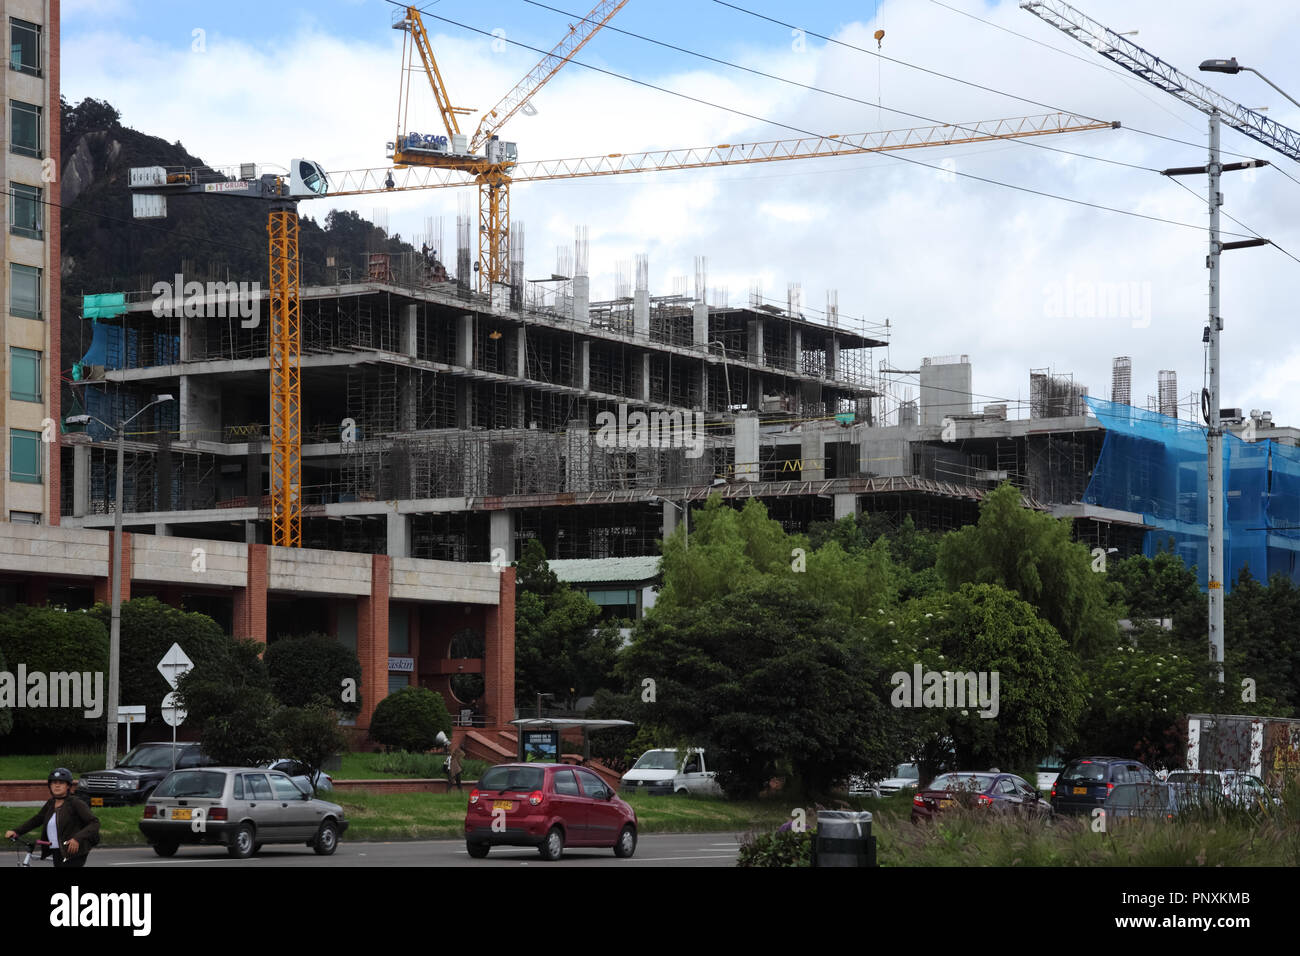 Bogota, Colombia - May 20, 2017: Construction on the Andes in the El Bosque Area as viewed from Carrera Novena, or translated, Avenue 9. Stock Photo